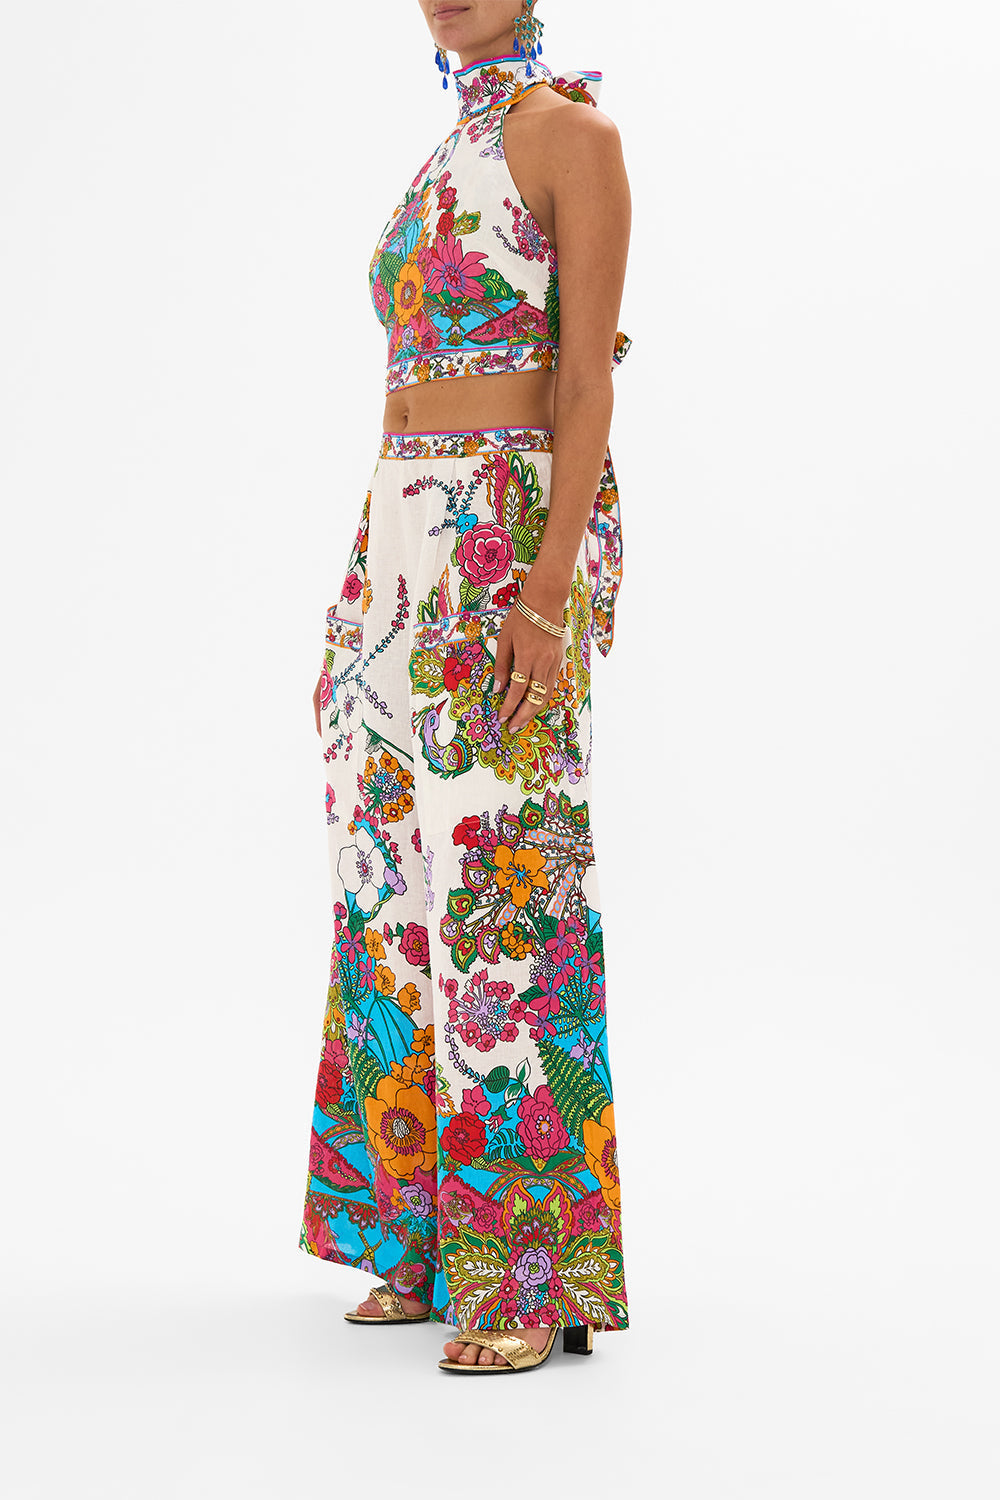 CAMILLA retro floral wide leg trouser with front pockets in Cosmic Prairie print.